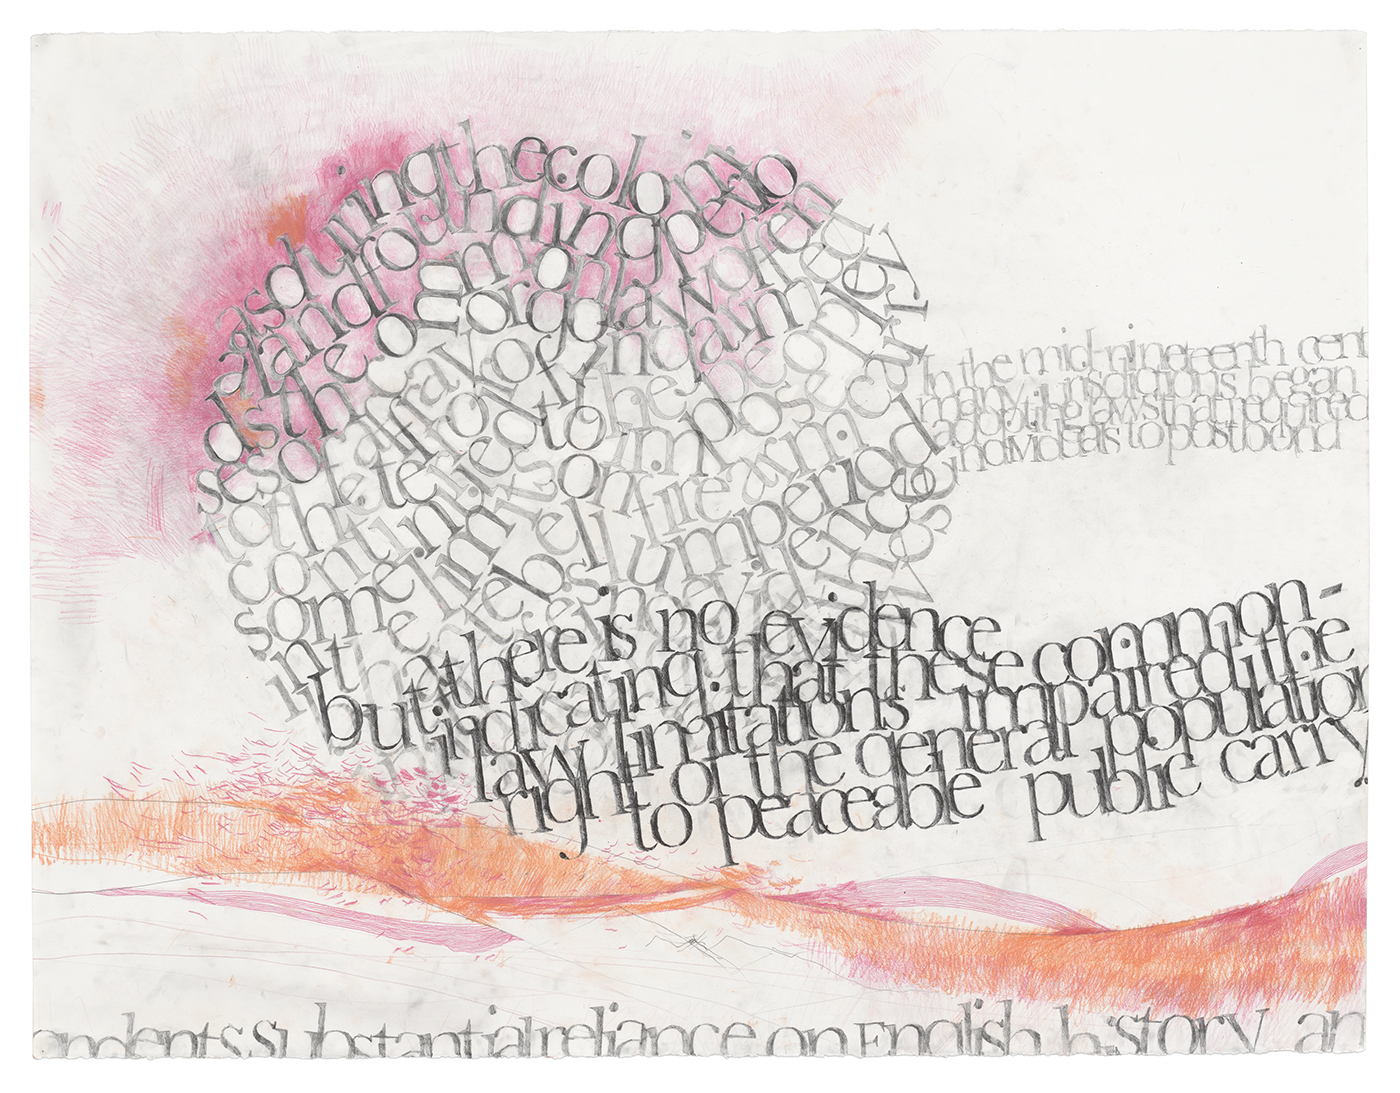 An artwork by Gabriel Sosa with words jumbled in a ball over pink and red splotches on a white background.